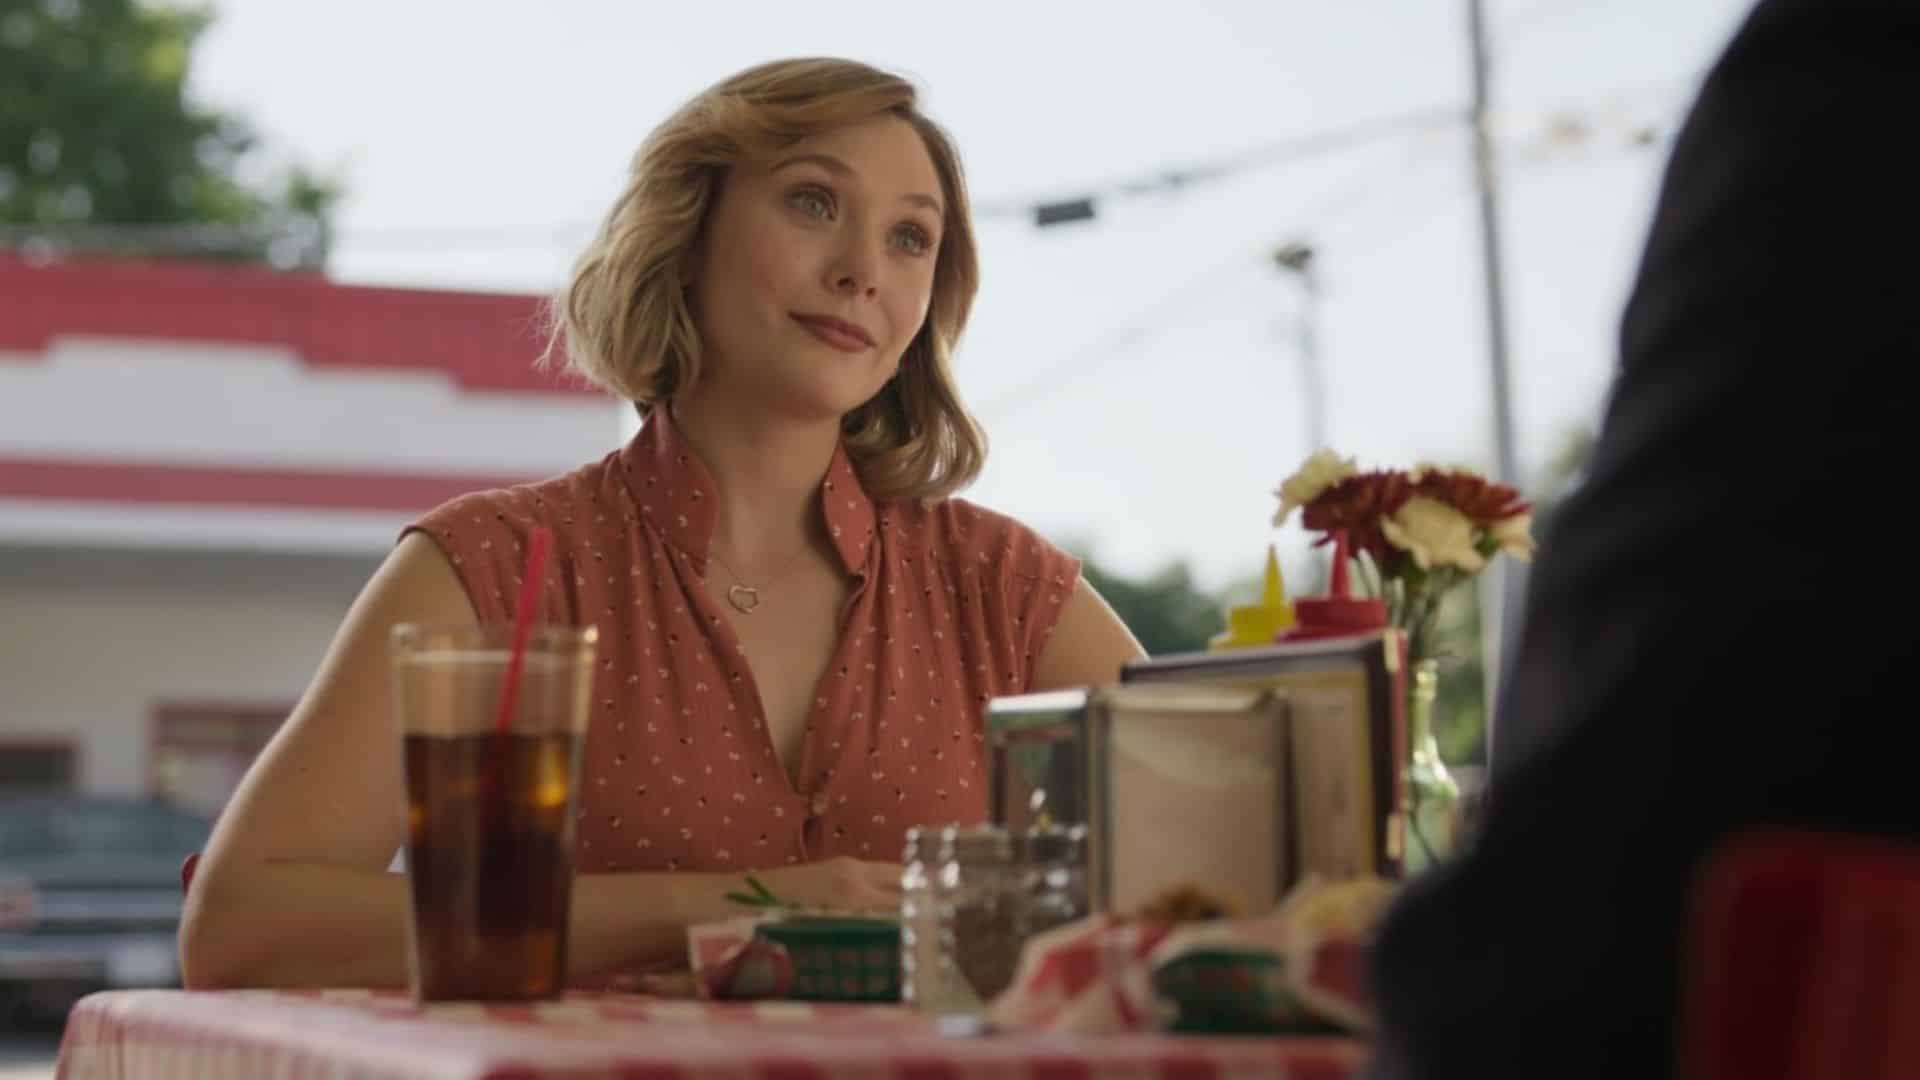 Elizabeth Olsen in a red dress at an outdoor restaurant table in this image from David E. Kelley Productions.